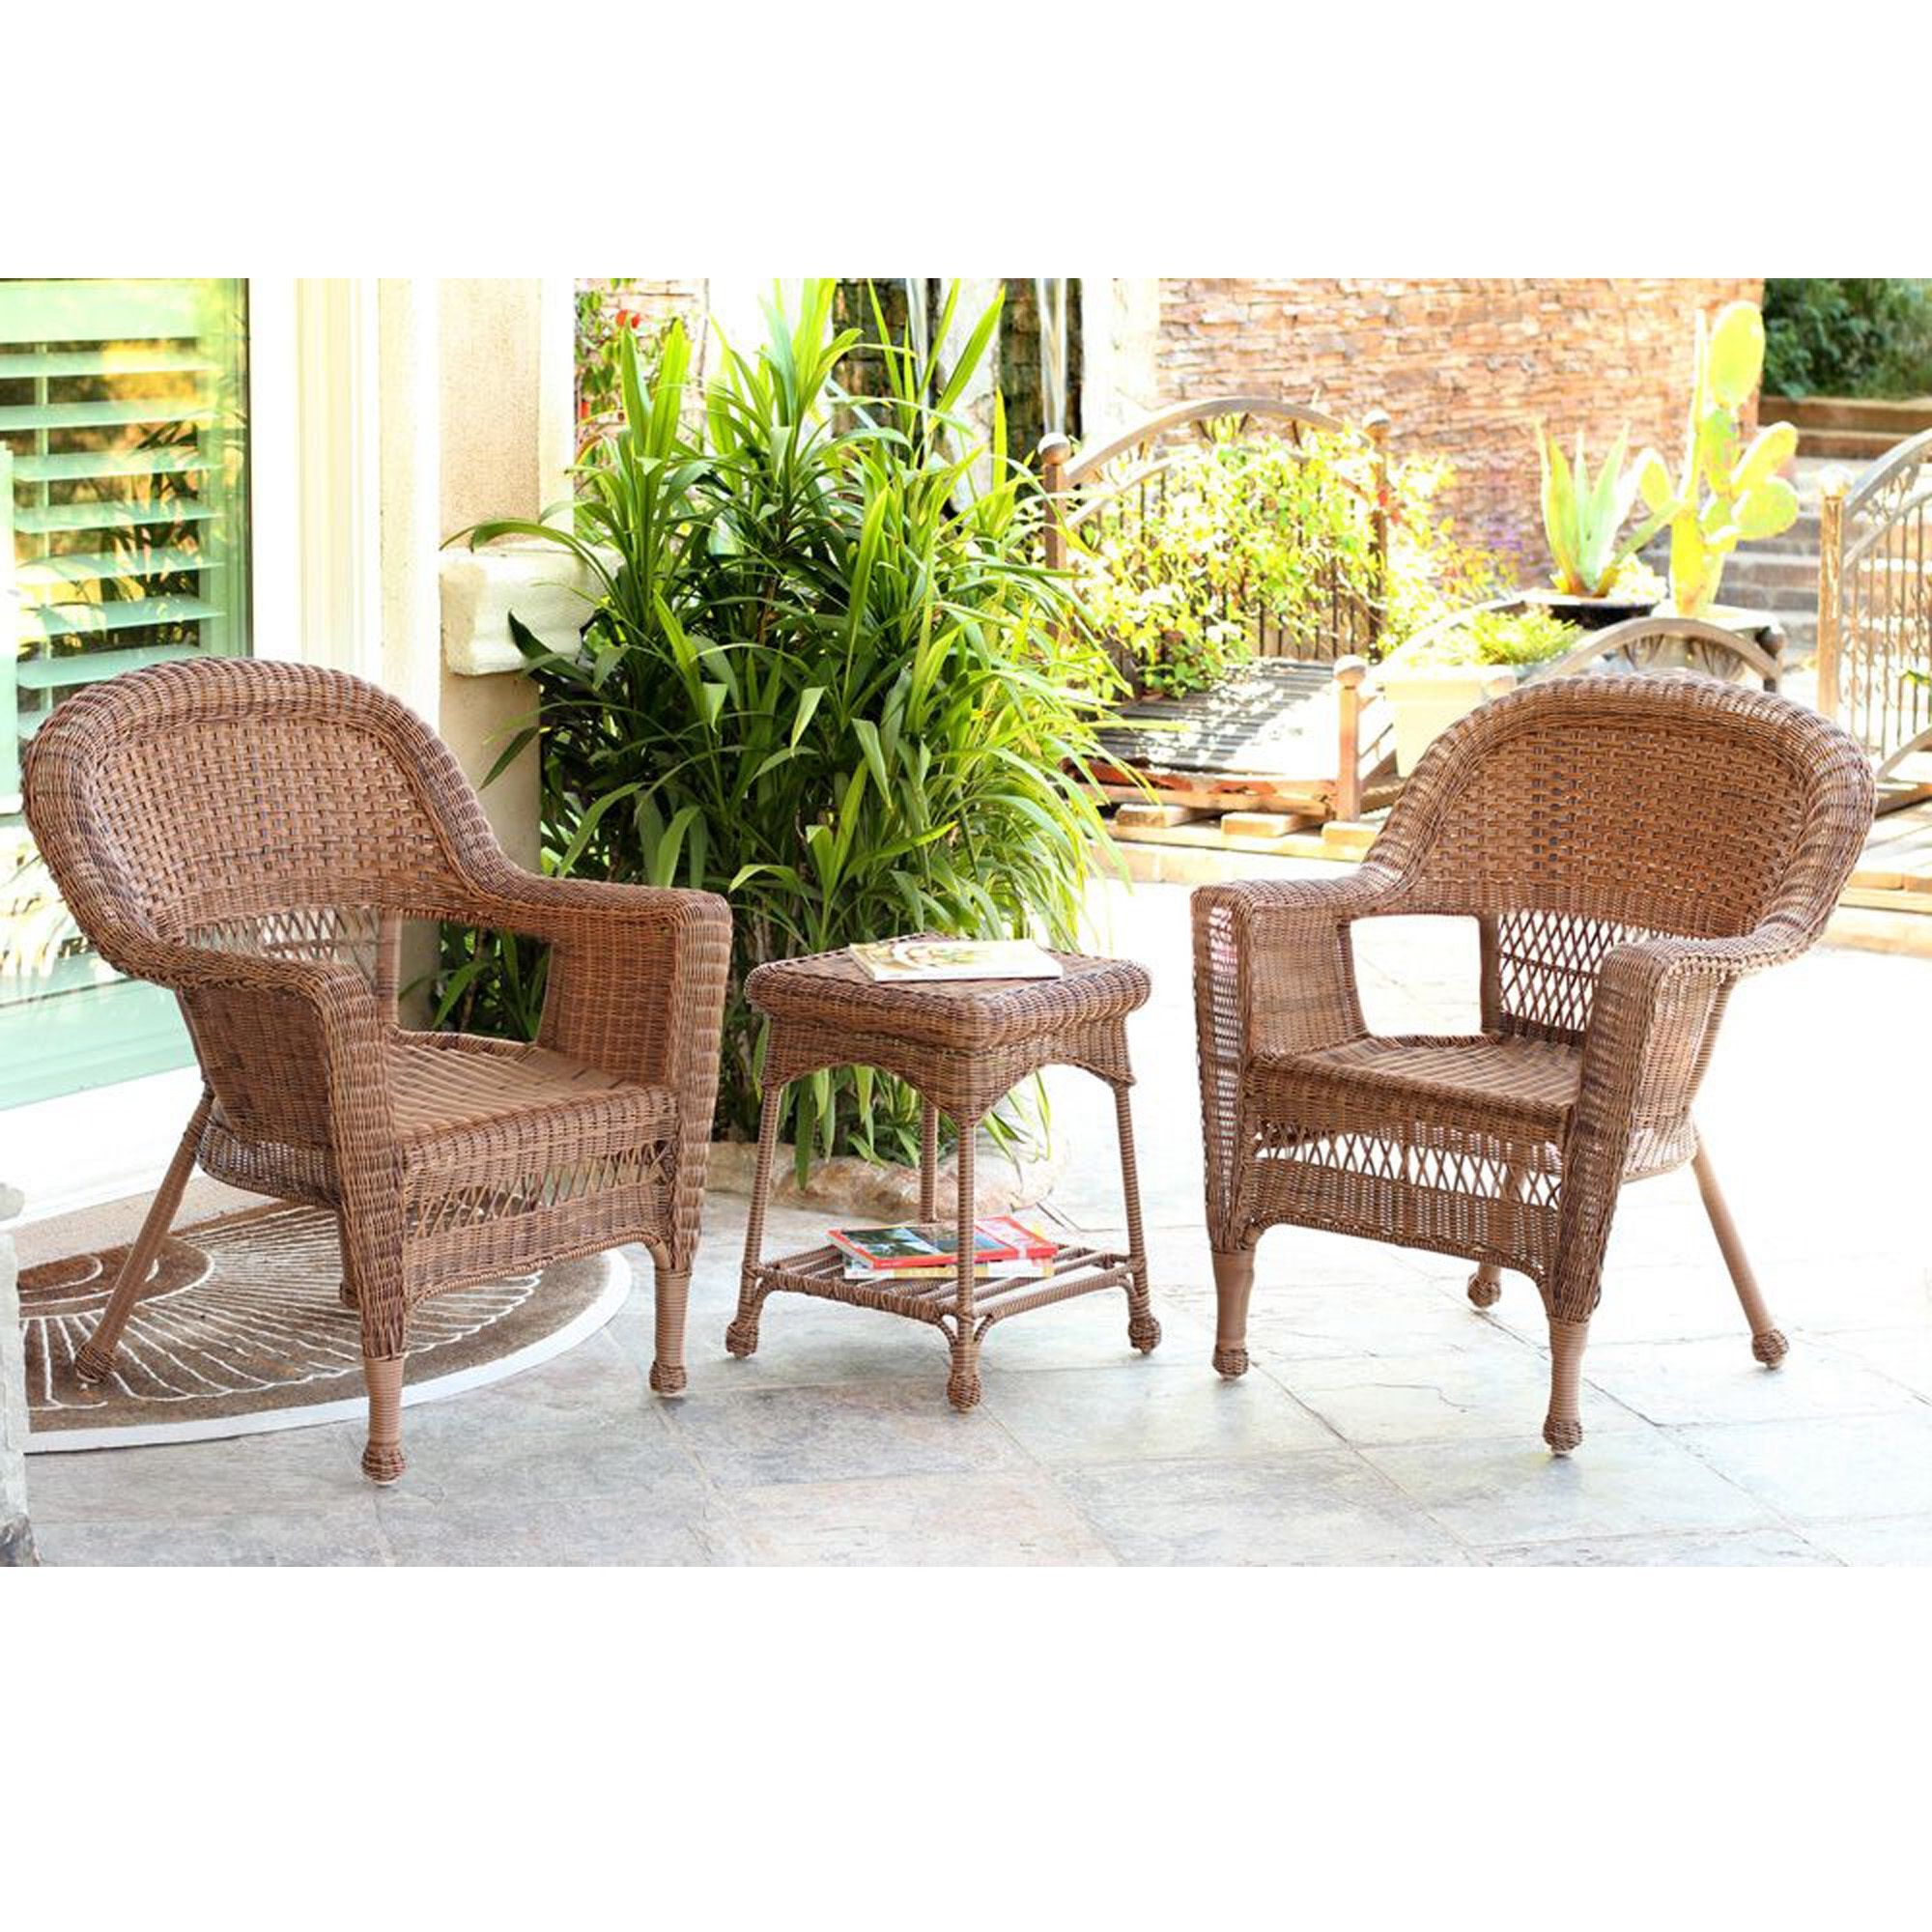 Set Of 3 Honey Brown Resin Wicker Patio Chairs And End Table Furniture Pertaining To Widely Used Rattan Wicker Outdoor Seating Sets (View 10 of 15)